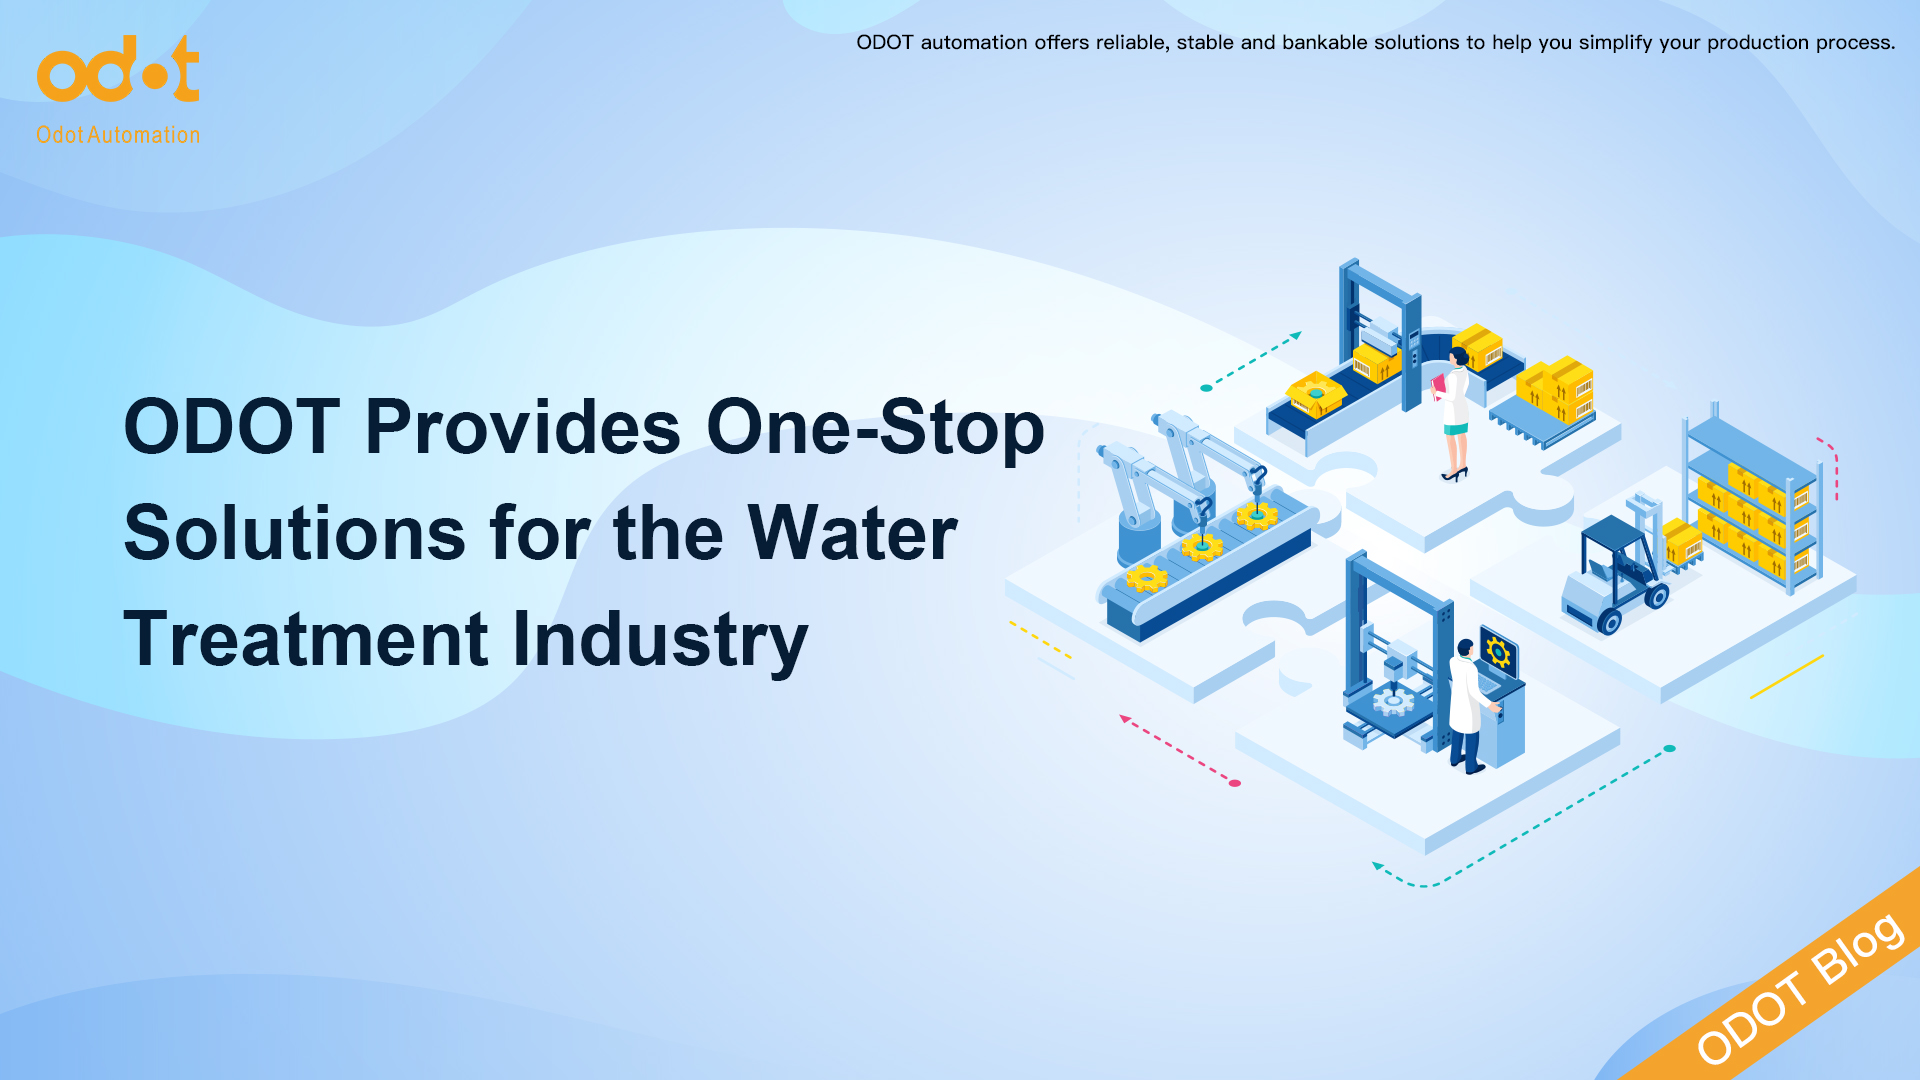 ODOT Provides One-Stop Solutions for the Water Treatment Industry